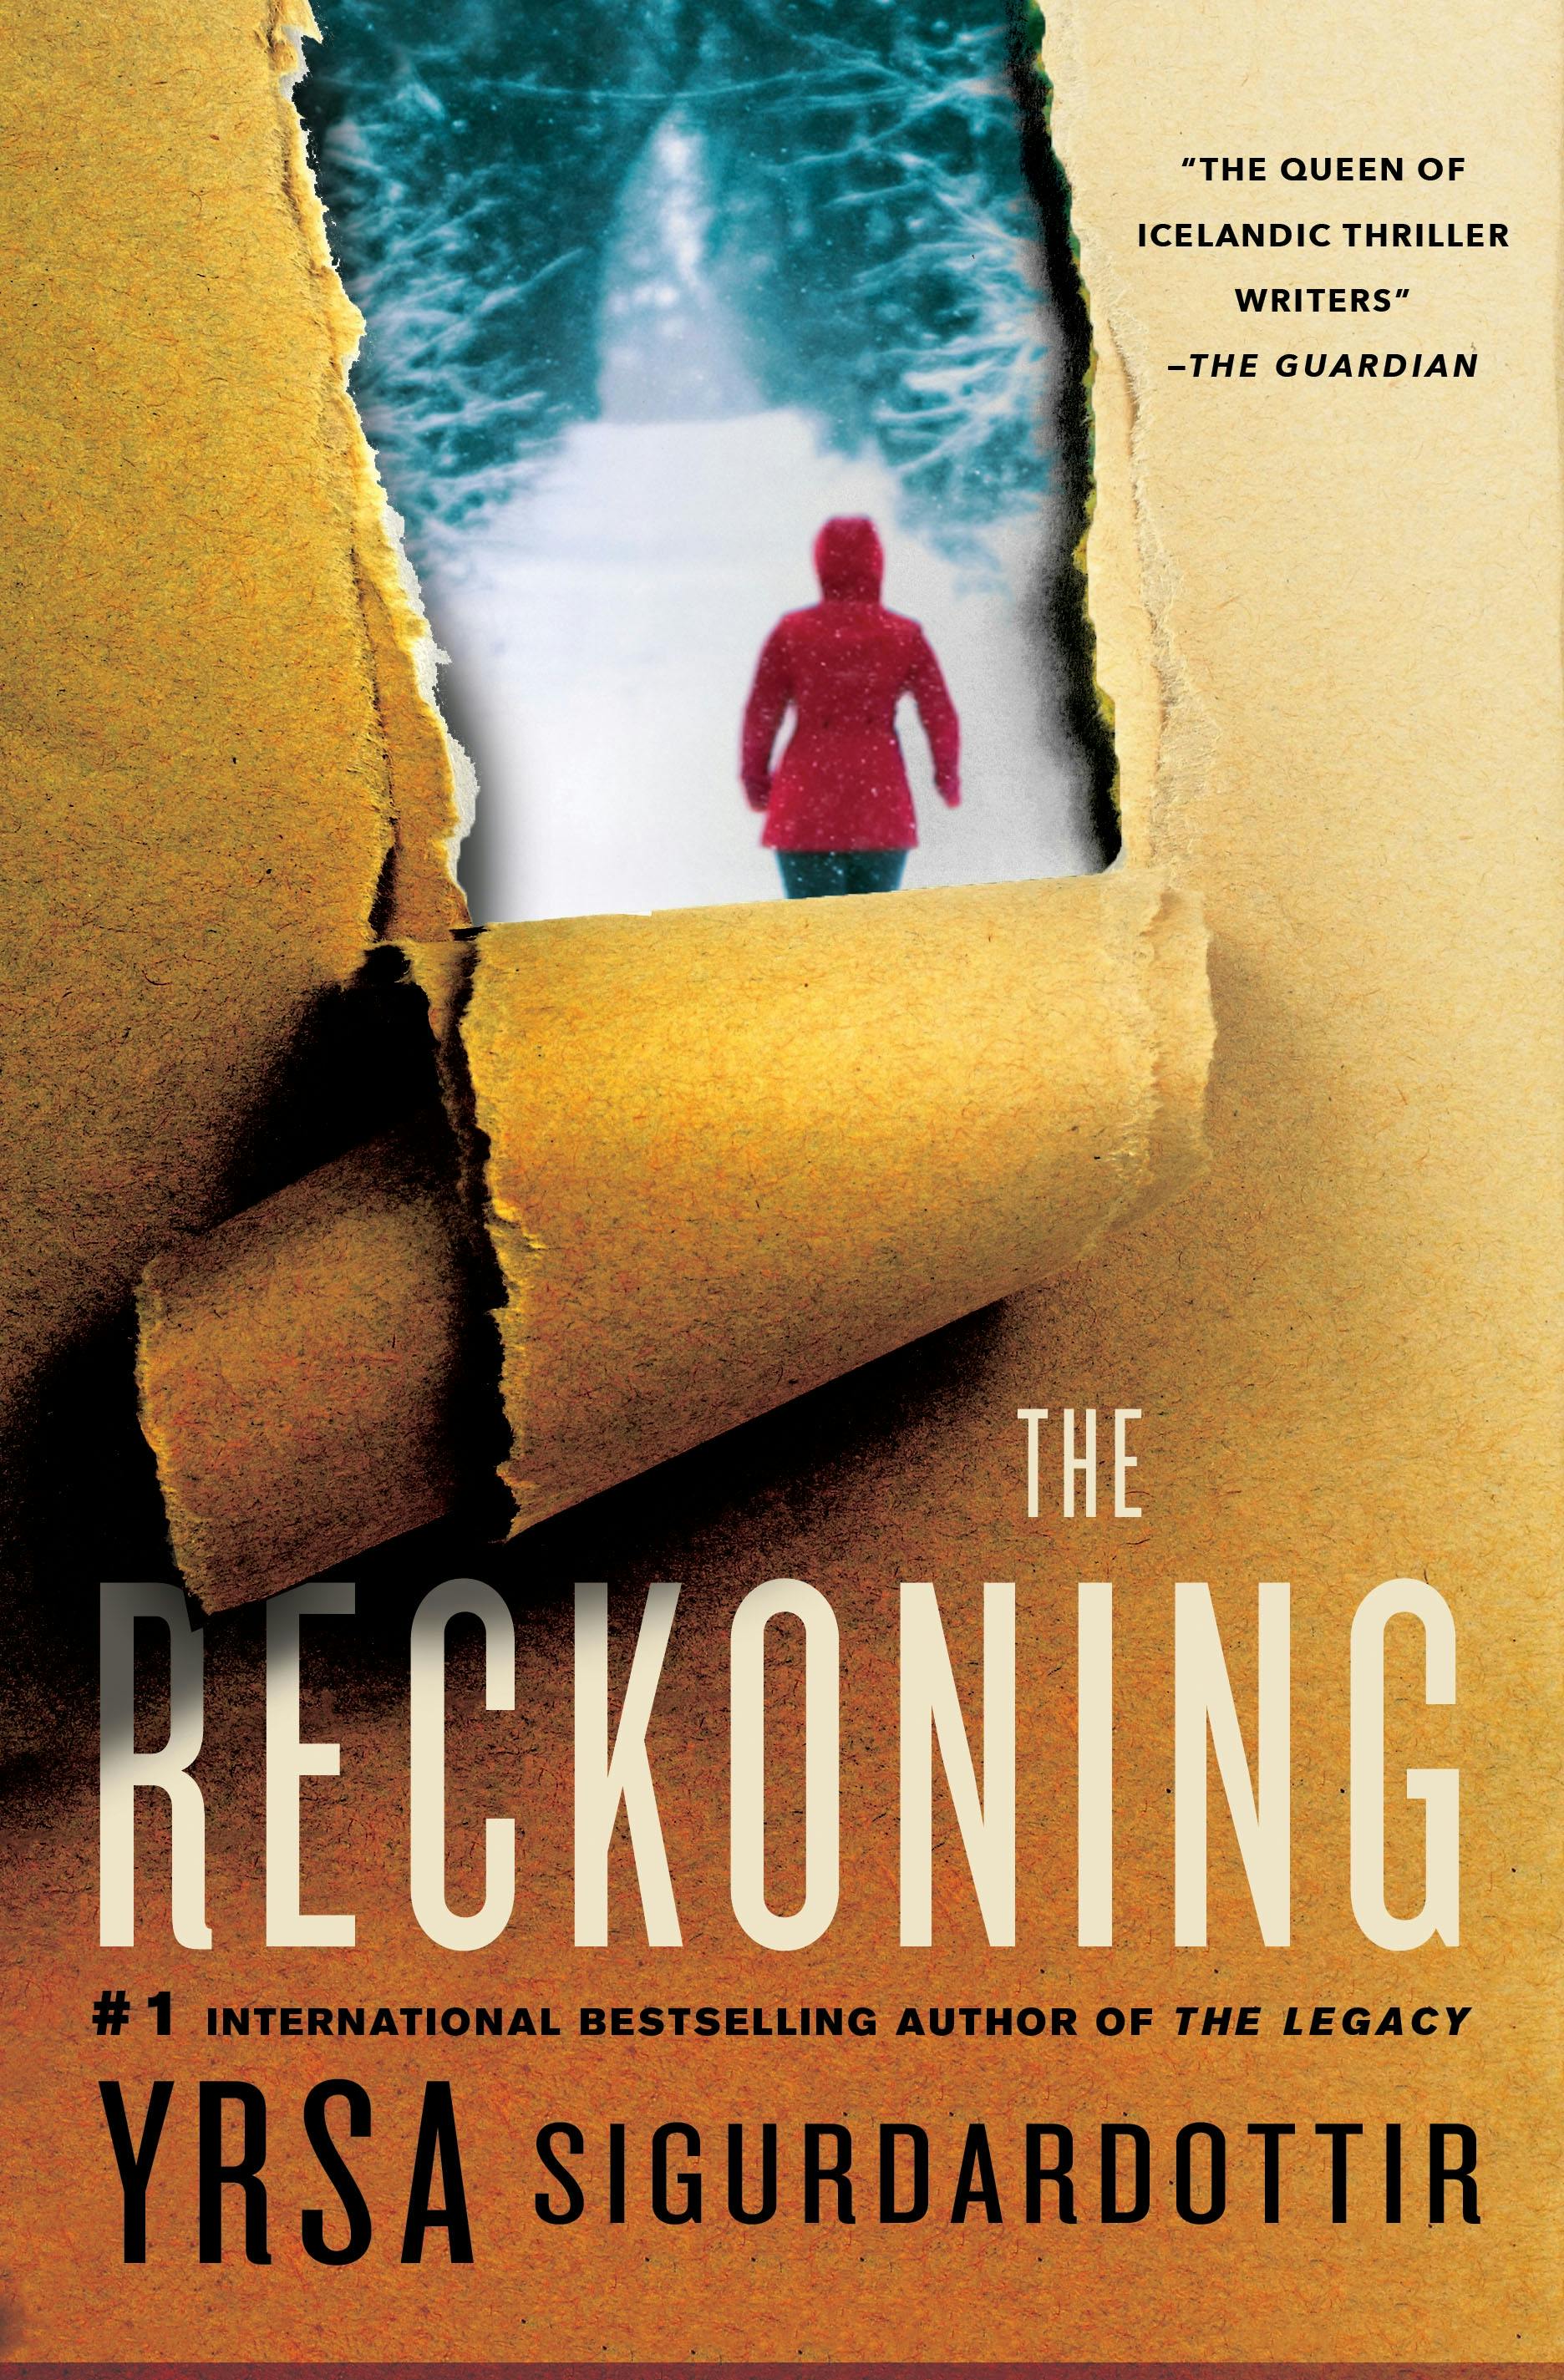 Image of The Reckoning